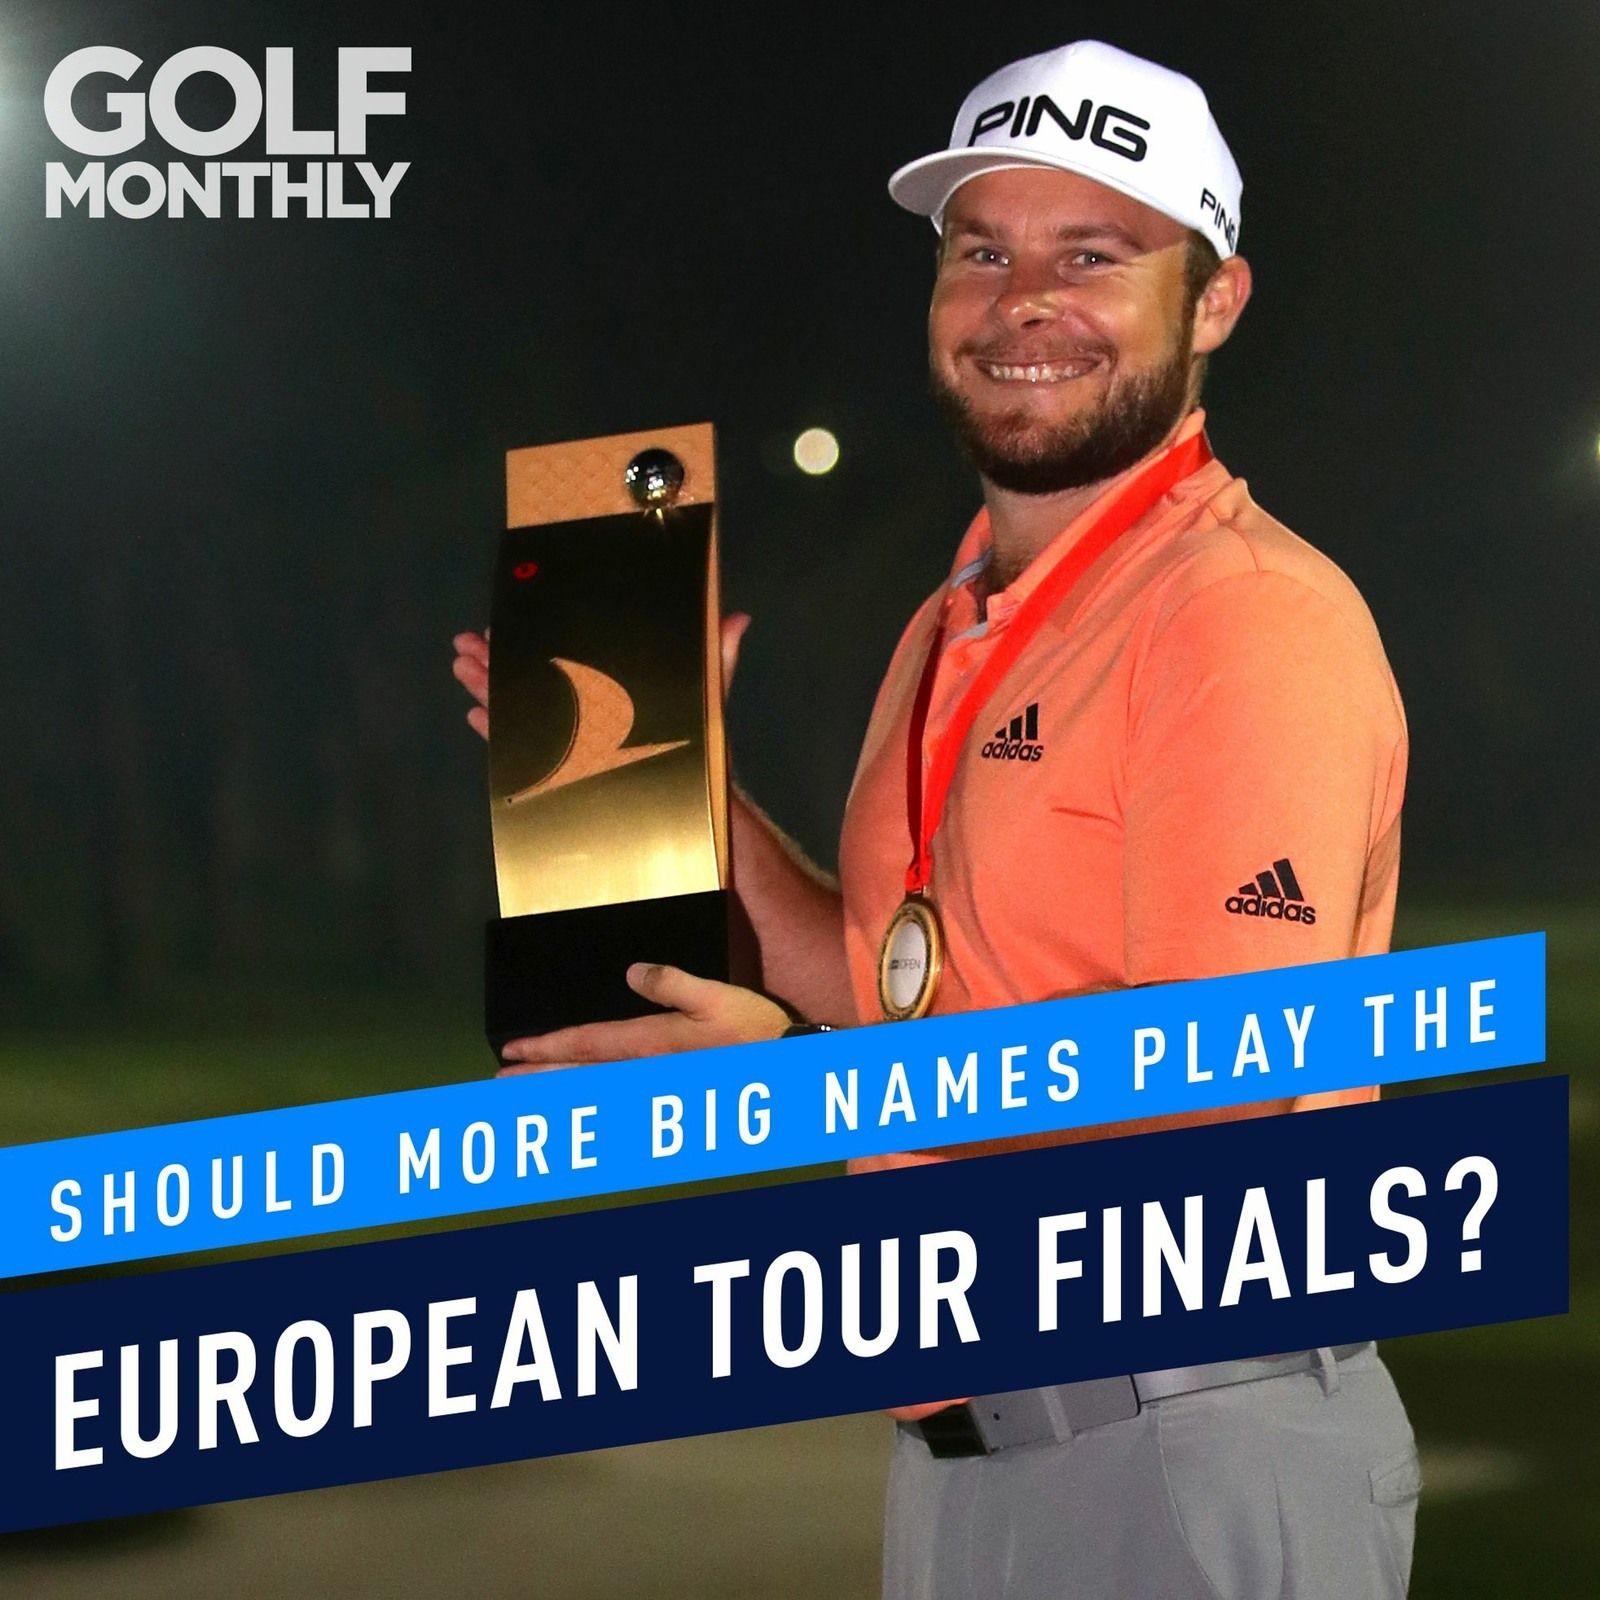 Should More Big Names Be Playing The European Tour Finals?